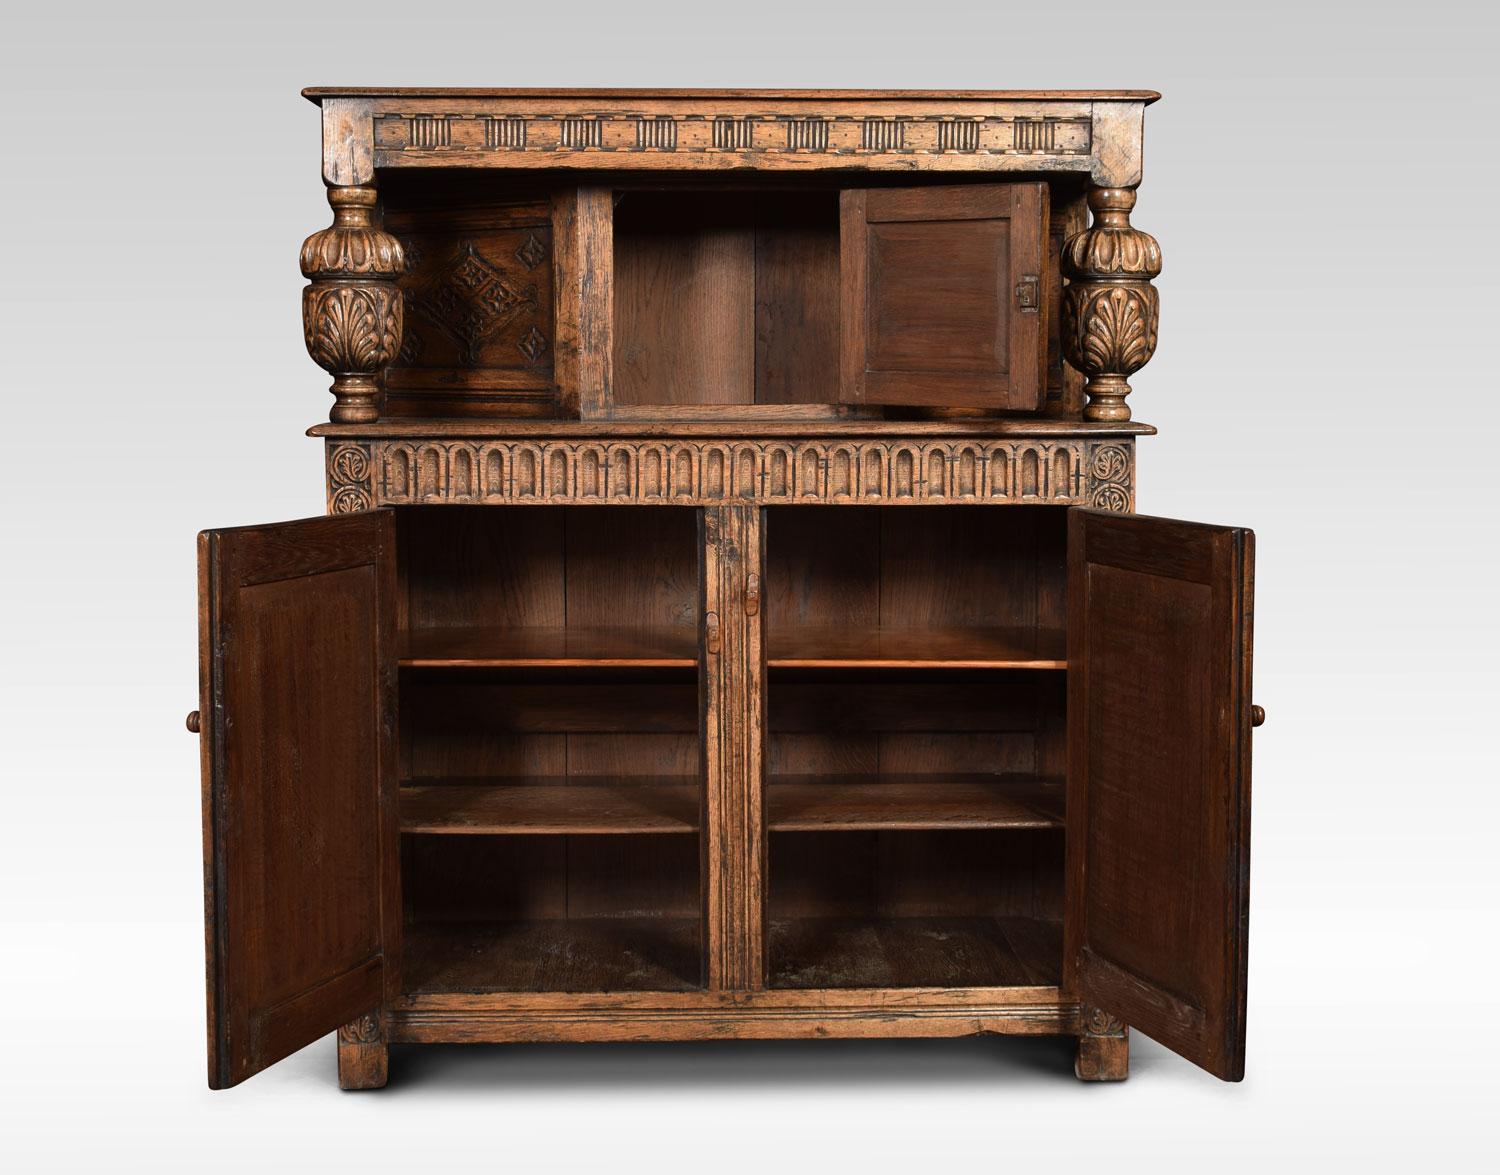 Oak court cupboard, the carved and panelled canted cupboard supported on turned cup and cover supports and arcaded frieze. The base section with two arched panelled doors opening to reveal shelved interior. Flanked by foliate carved